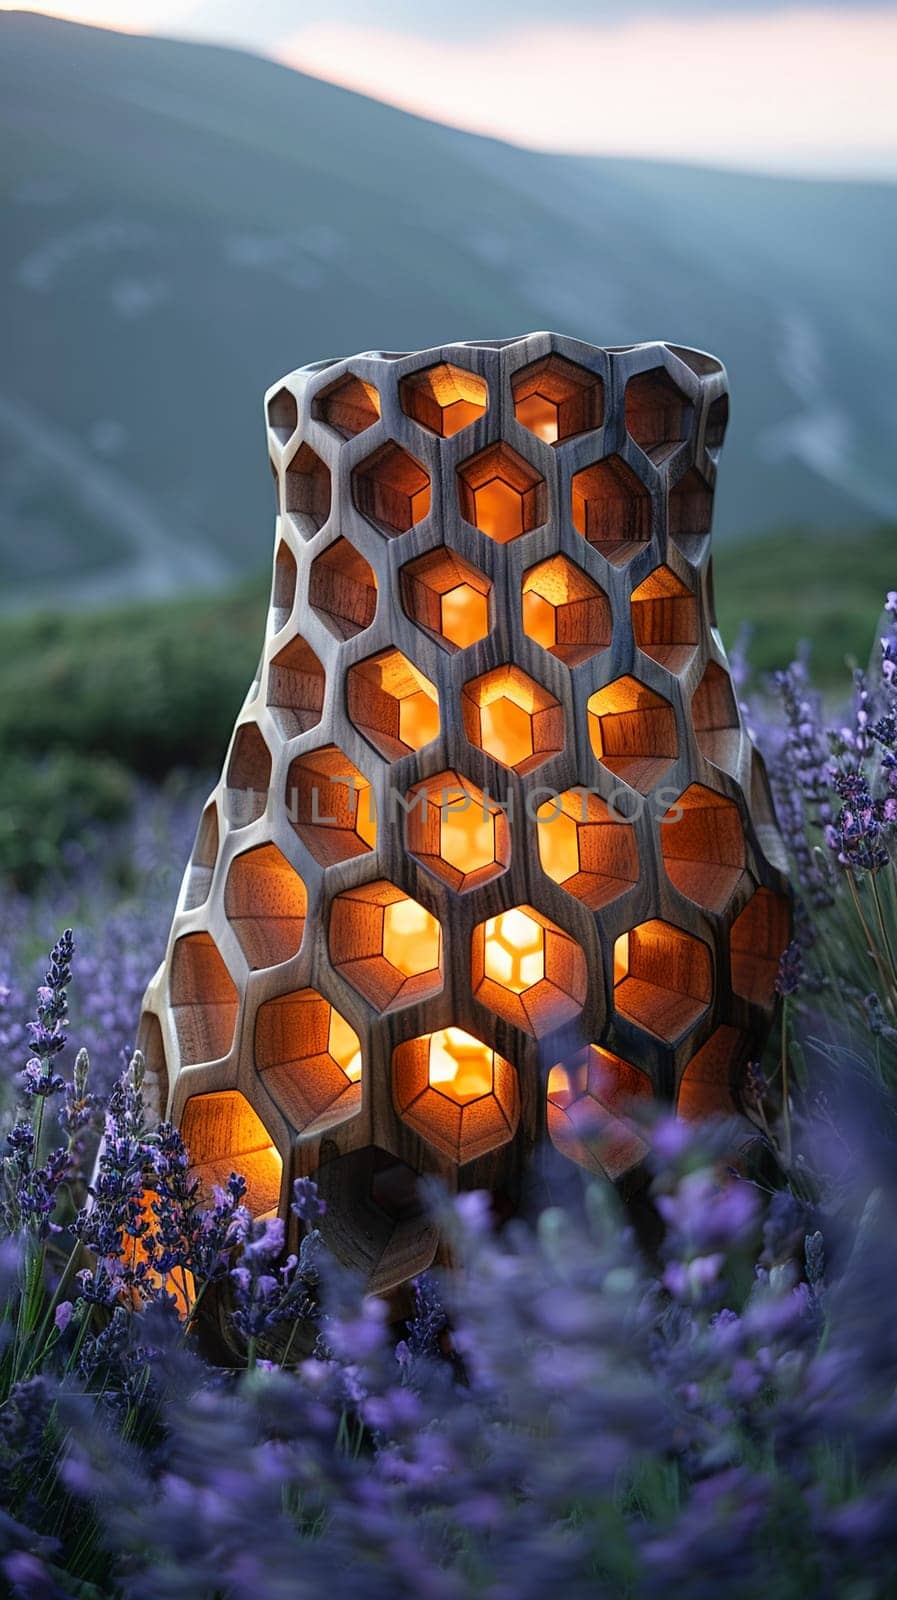 Honeycomb Patterned Stand in a Field of Wild Lavender, The structure blends with the natural setting, perfect for organic skincare ranges.